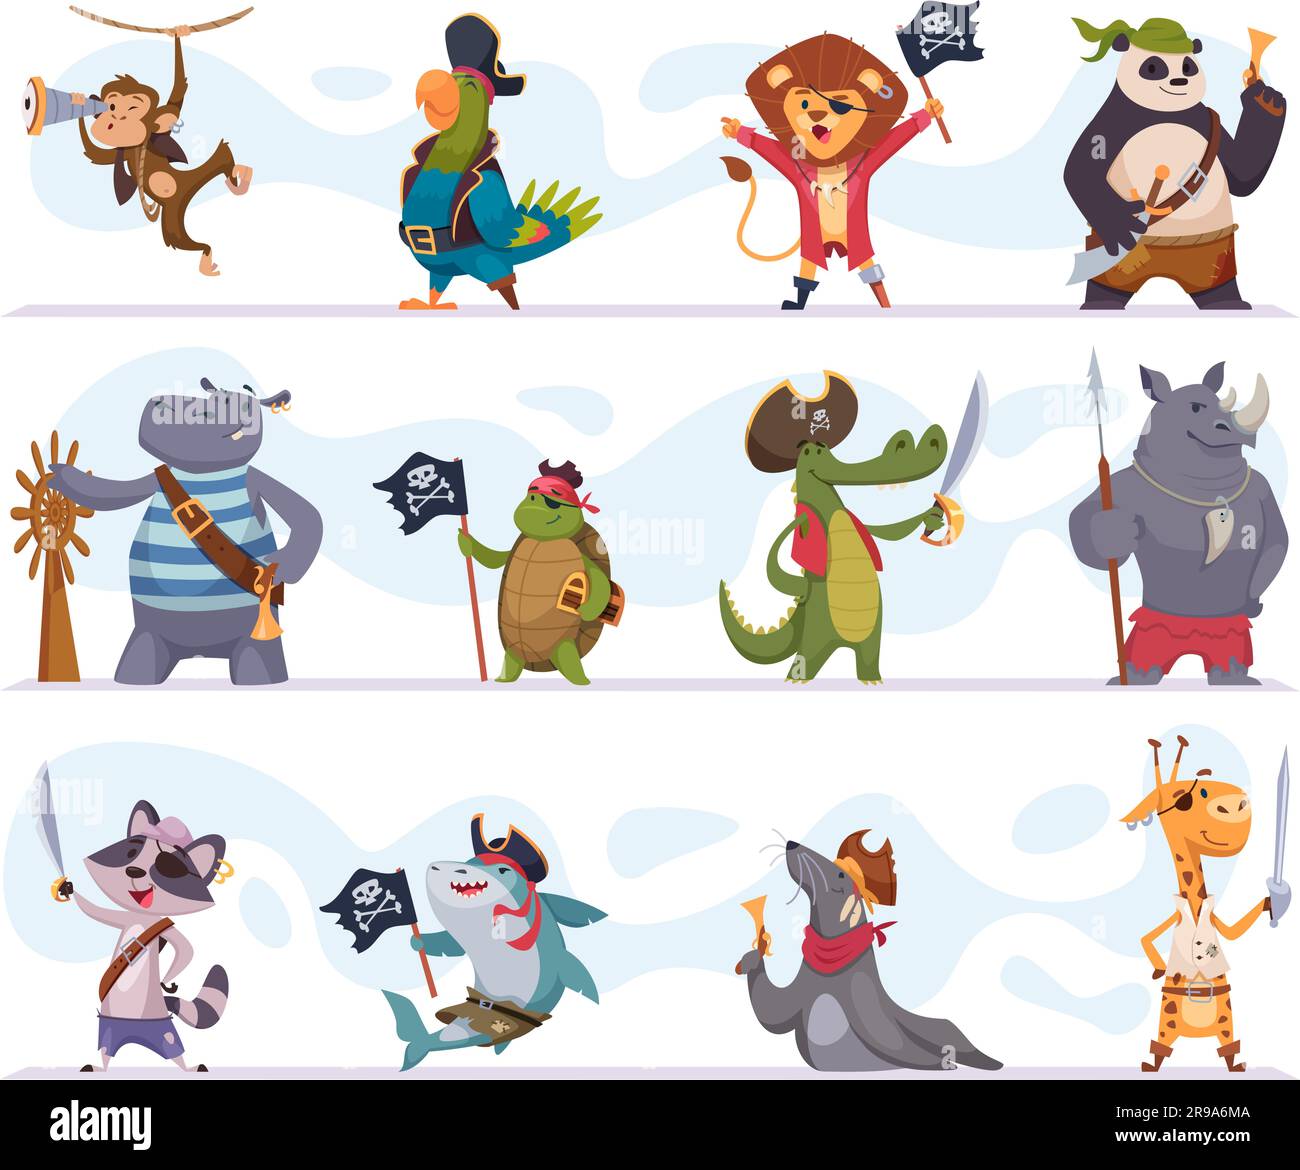 Animal pirate. Sailors cartoon animals with weapons in action poses exact vector pictures collection Stock Vector